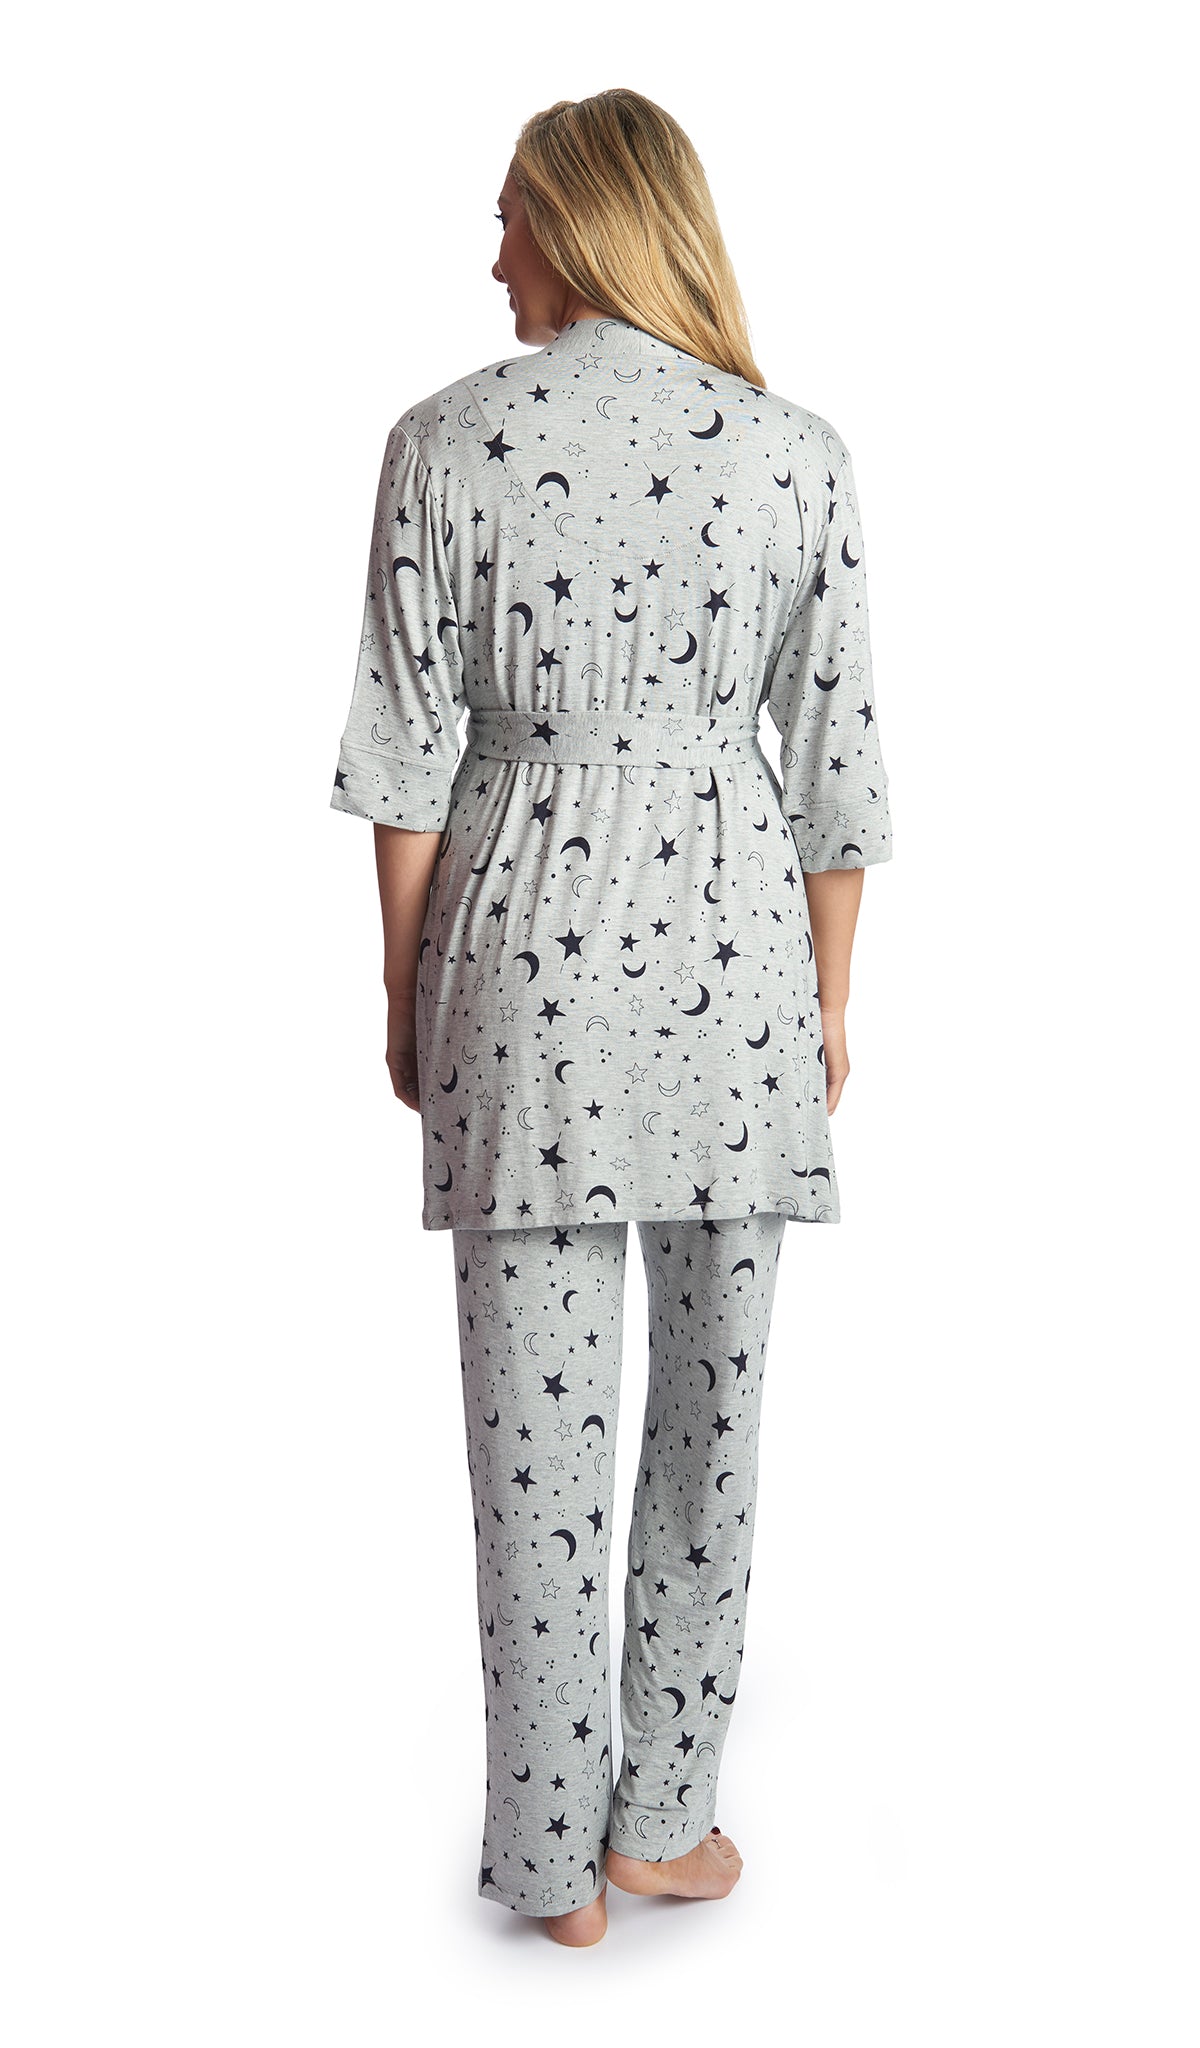 Twinkle Night Analise 5-Piece Set, back shot of woman wearing robe and pant.